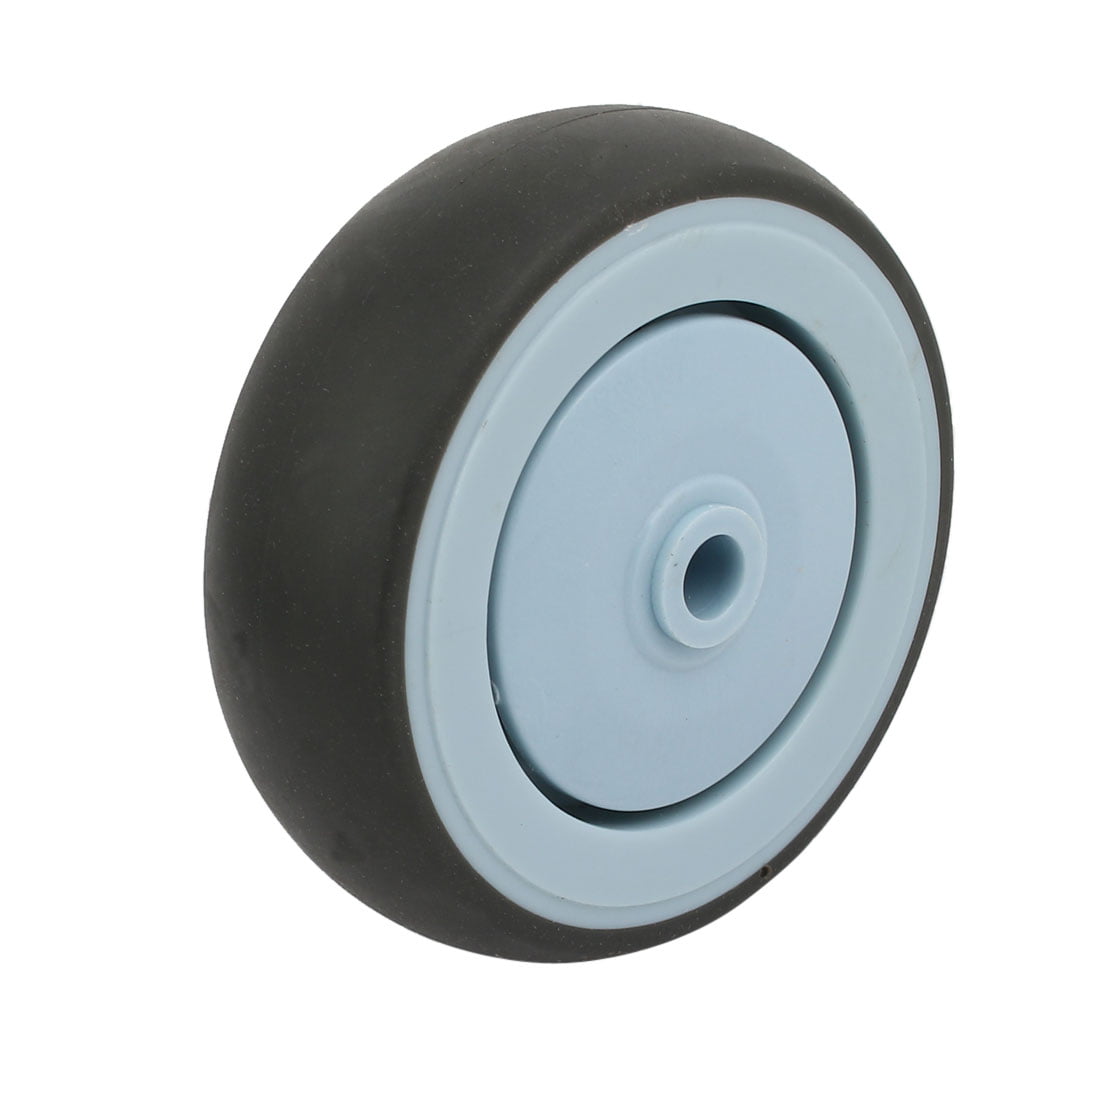 Unique Bargains 4 Inch Diameter Tpr Single Wheel Trolley Caster Pulley